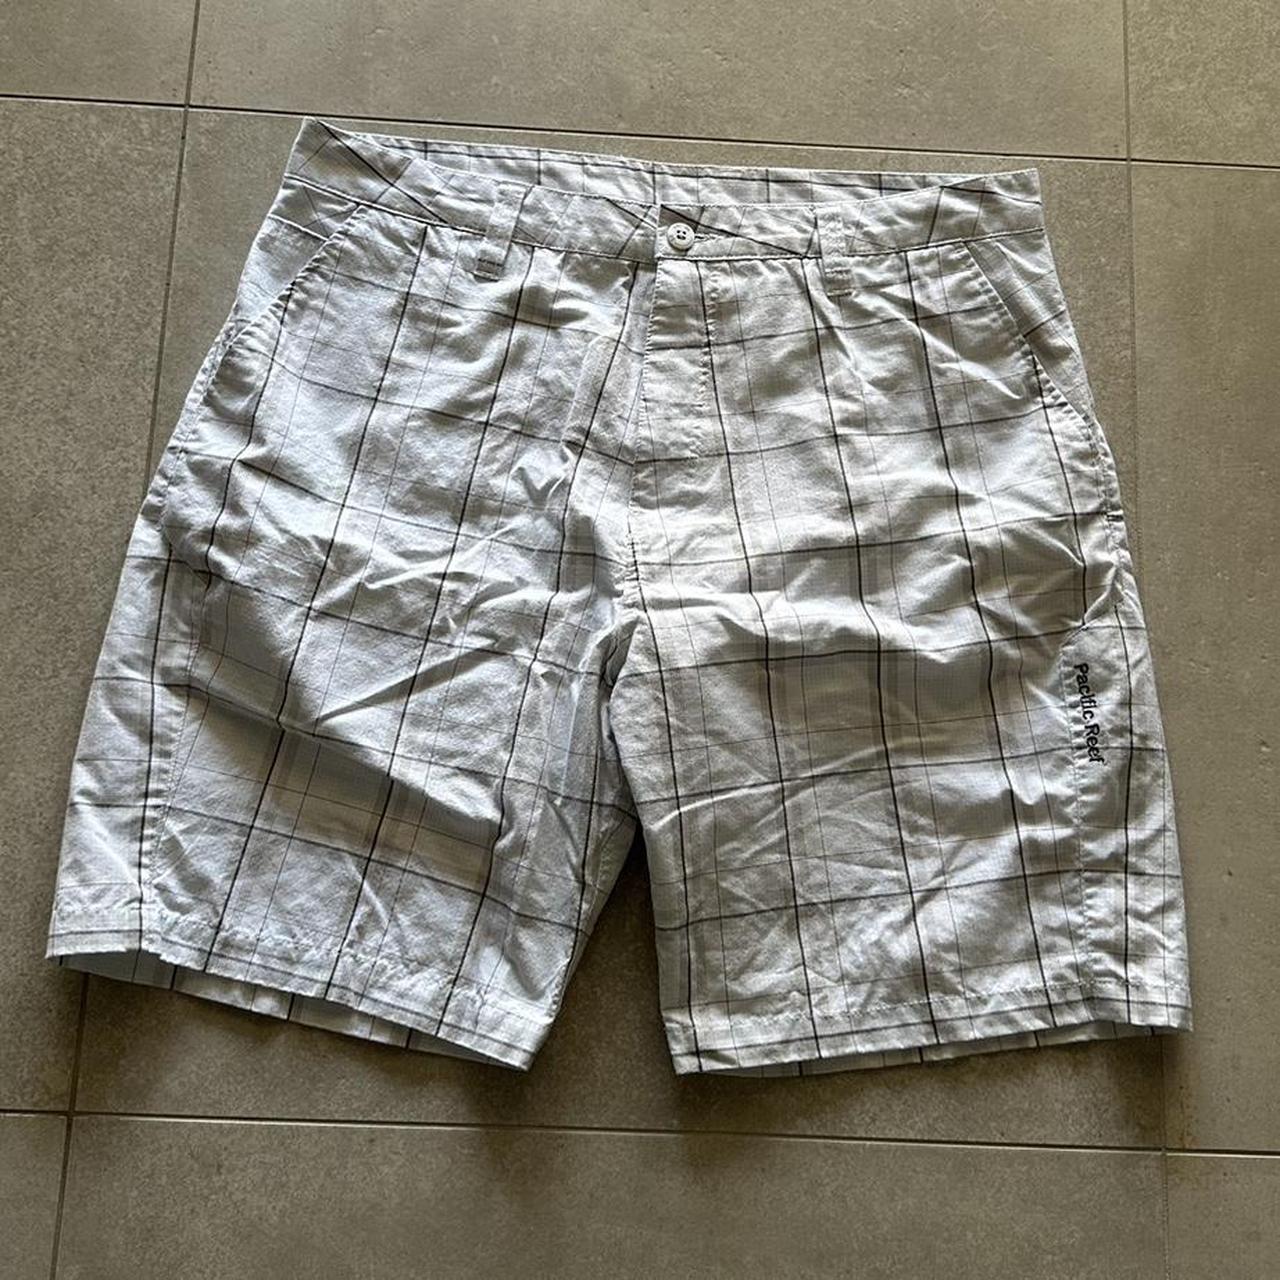 Y2K Target Shorts in white and black pattern amazing... - Depop